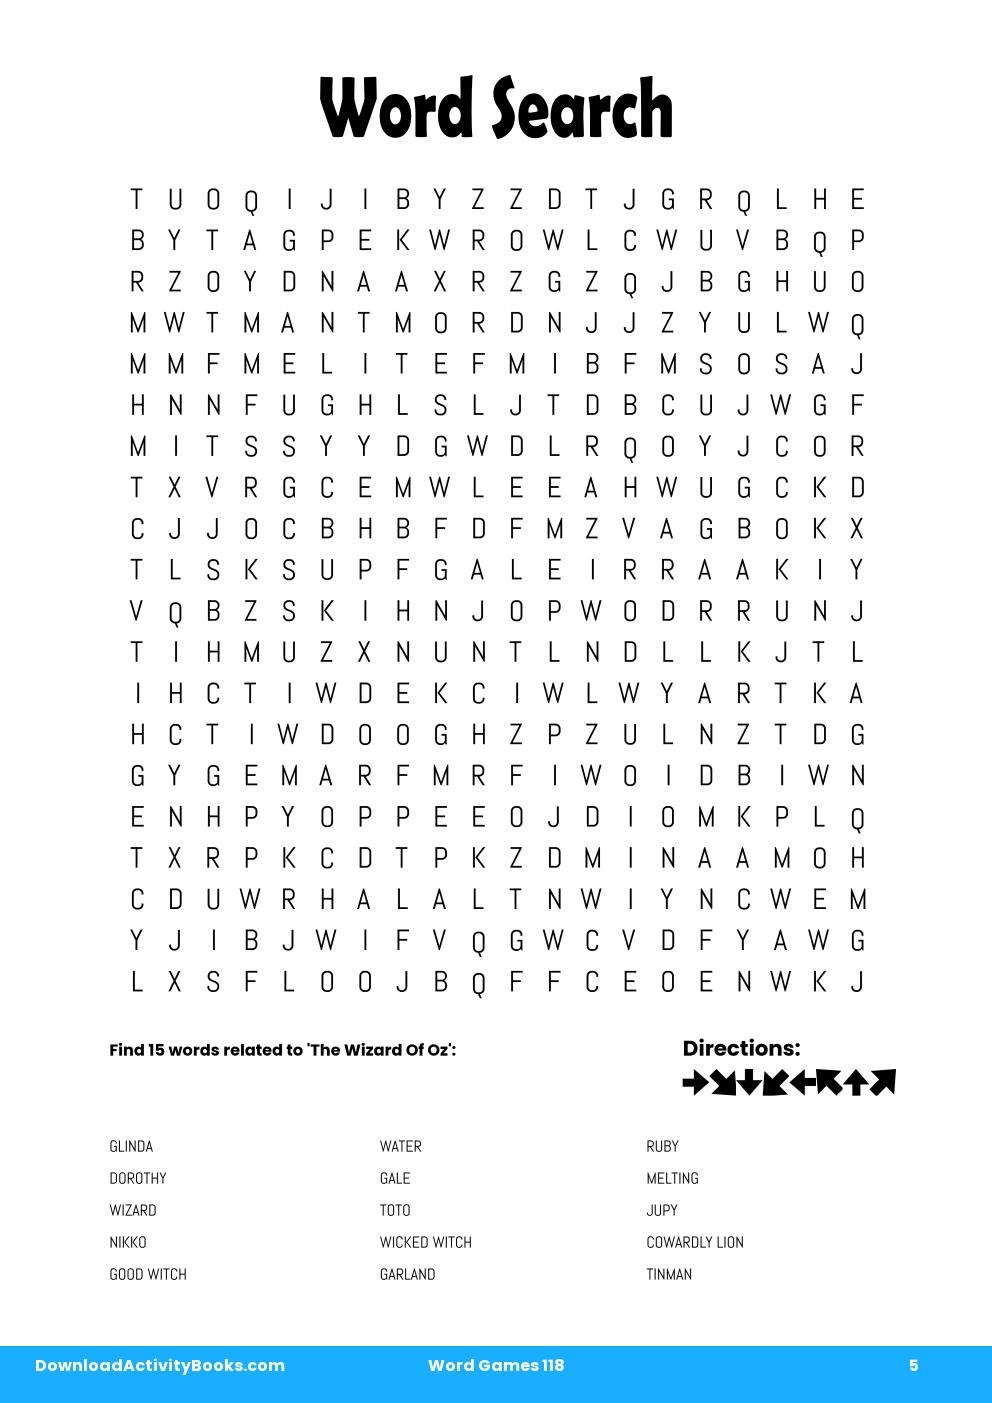 Word Search in Word Games 118